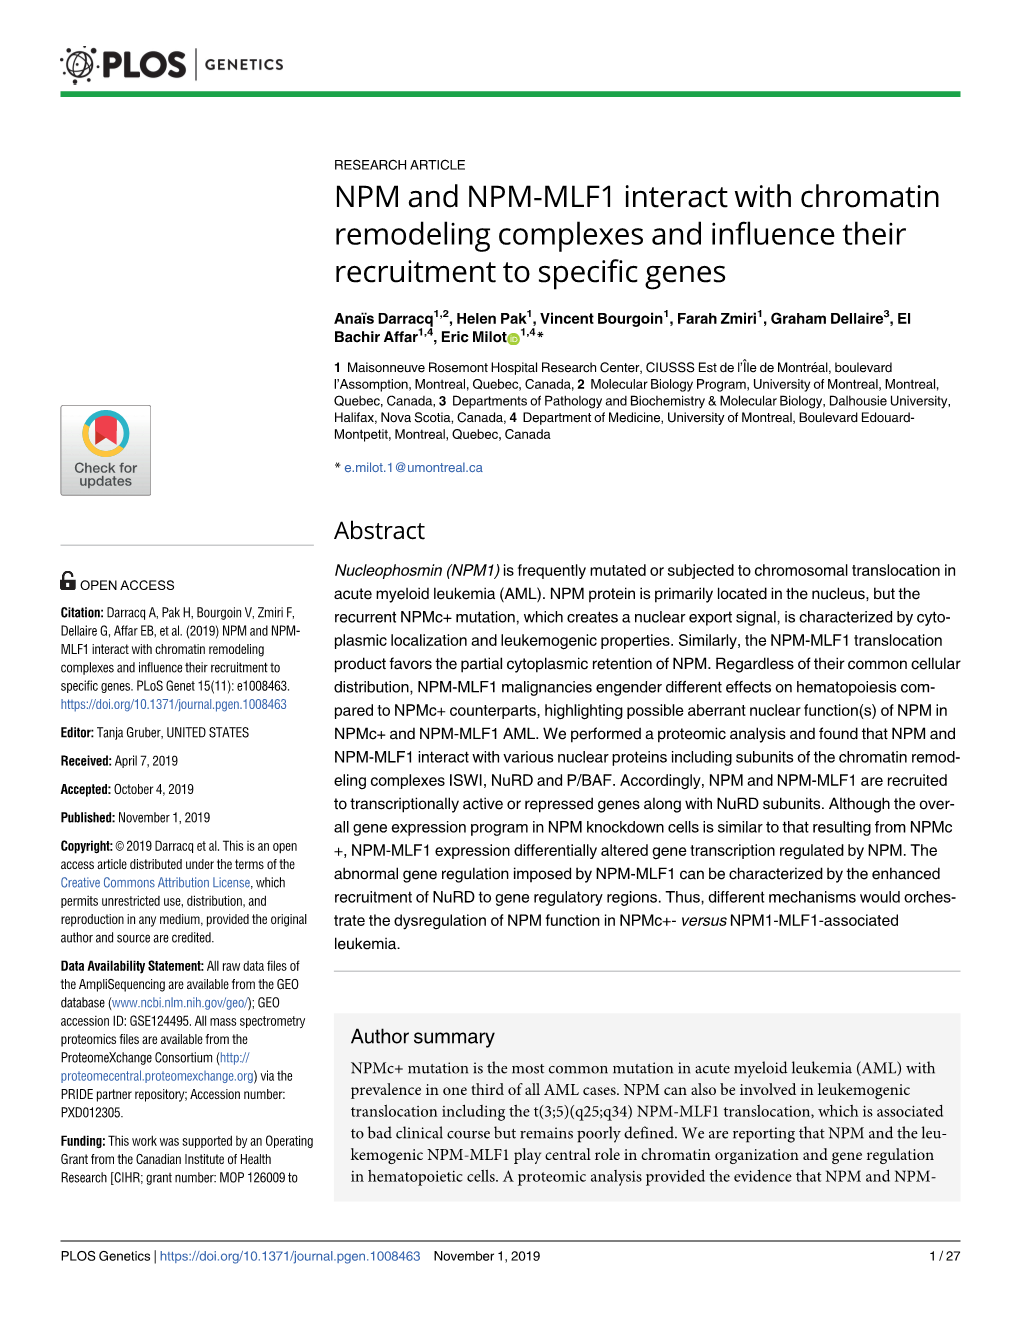 NPM and NPM-MLF1 Interact with Chromatin Remodeling Complexes and Influence Their Recruitment to Specific Genes